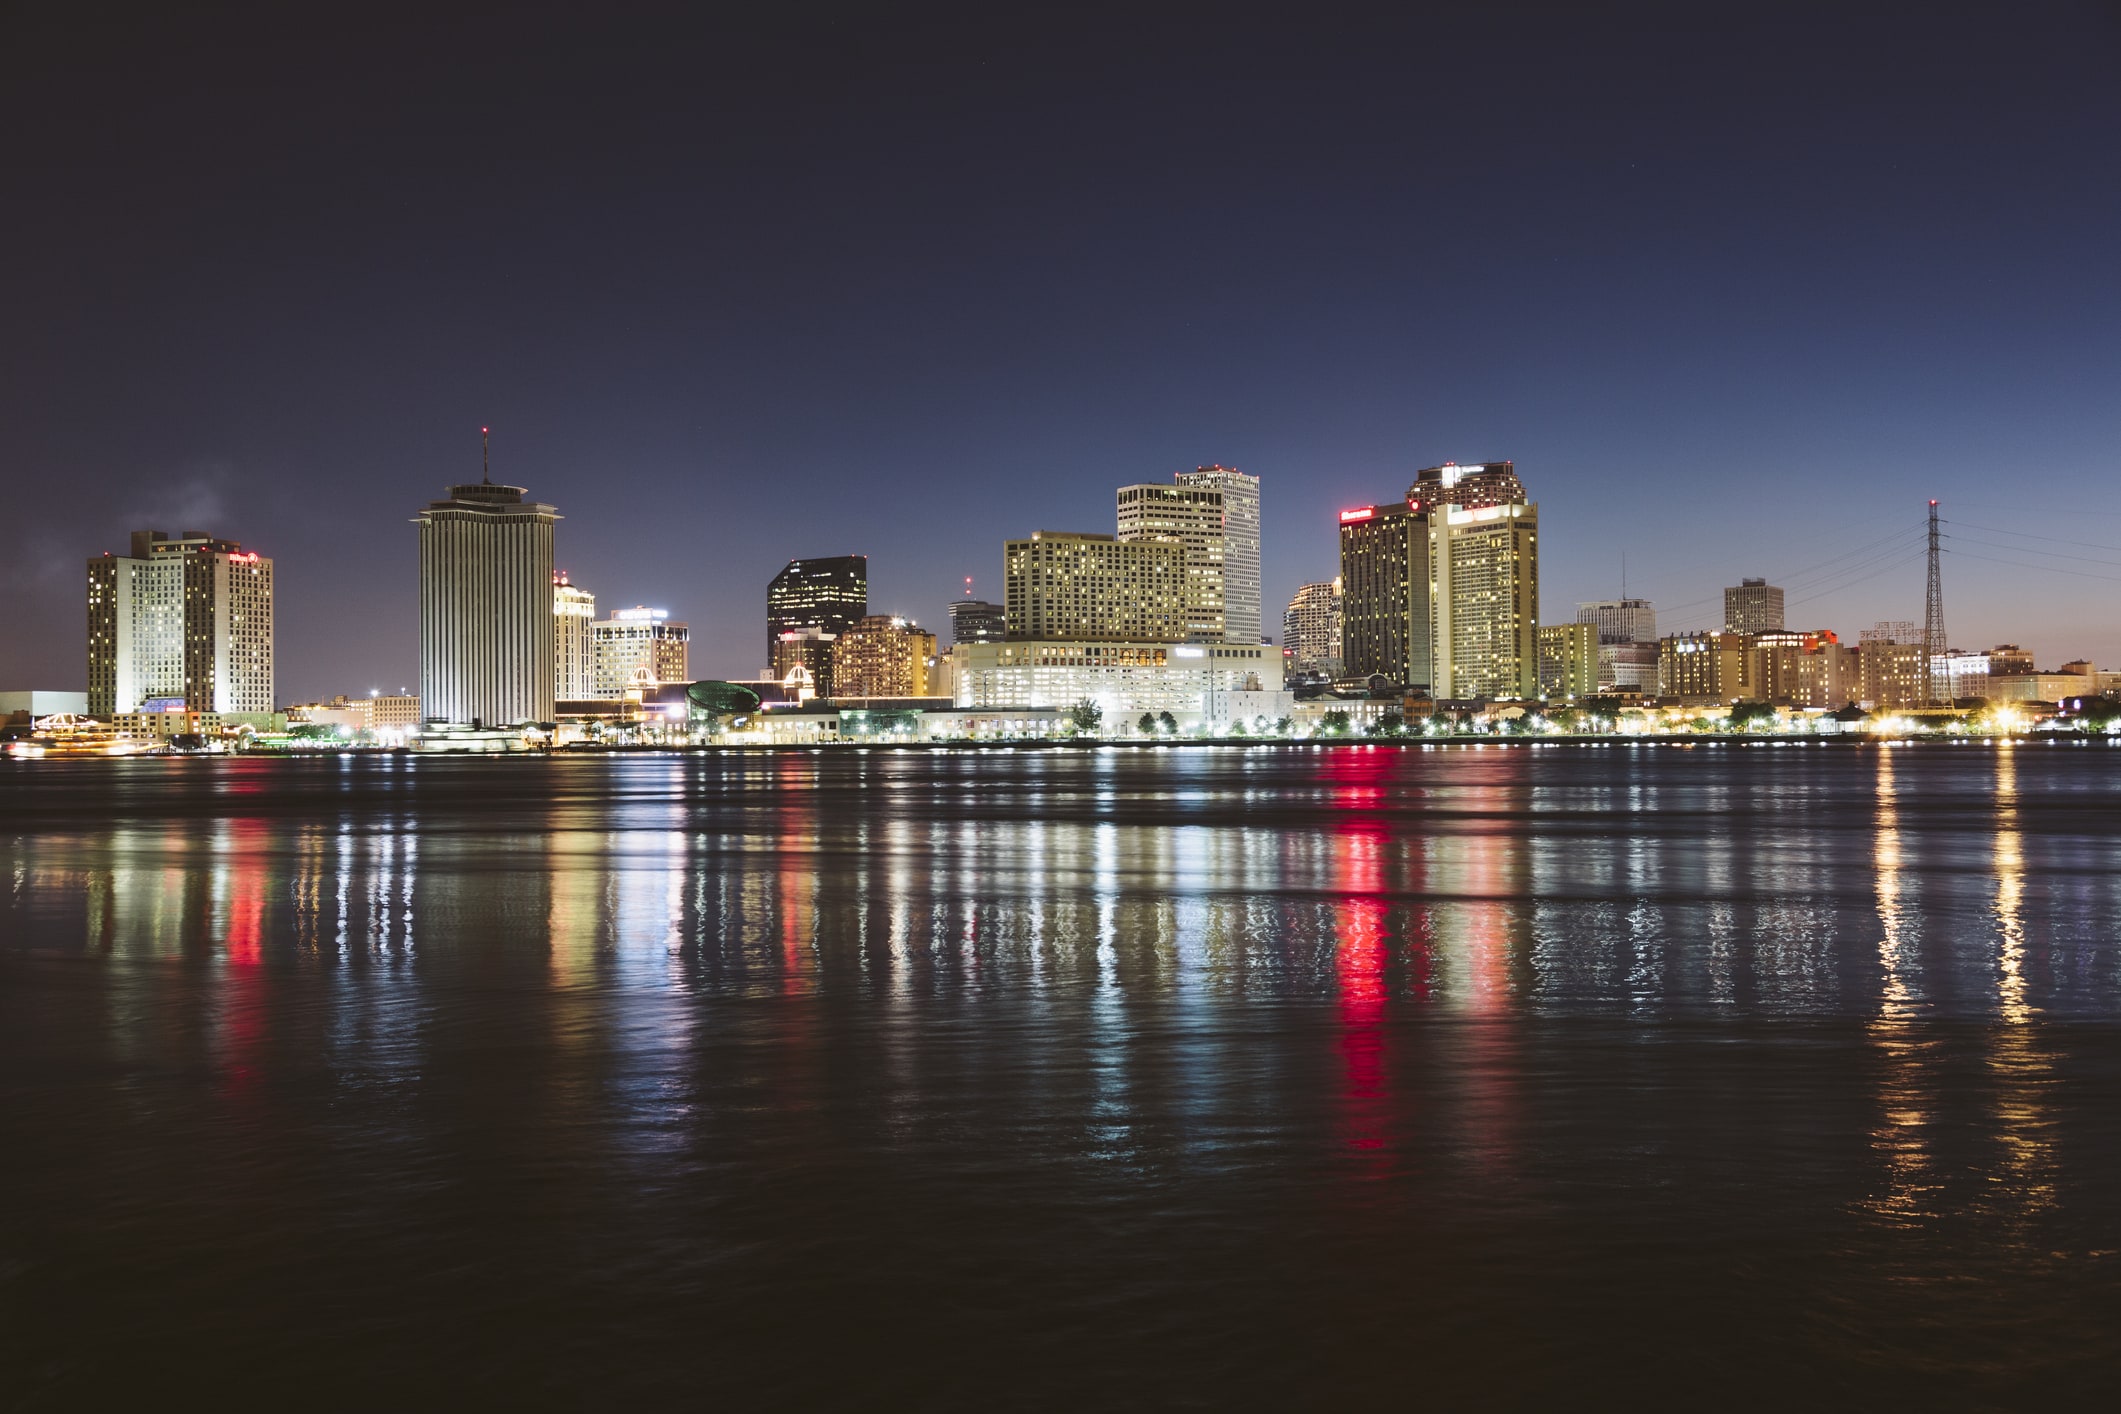 USA, New Orleans, Downtown reflected in the Mississippi river at night